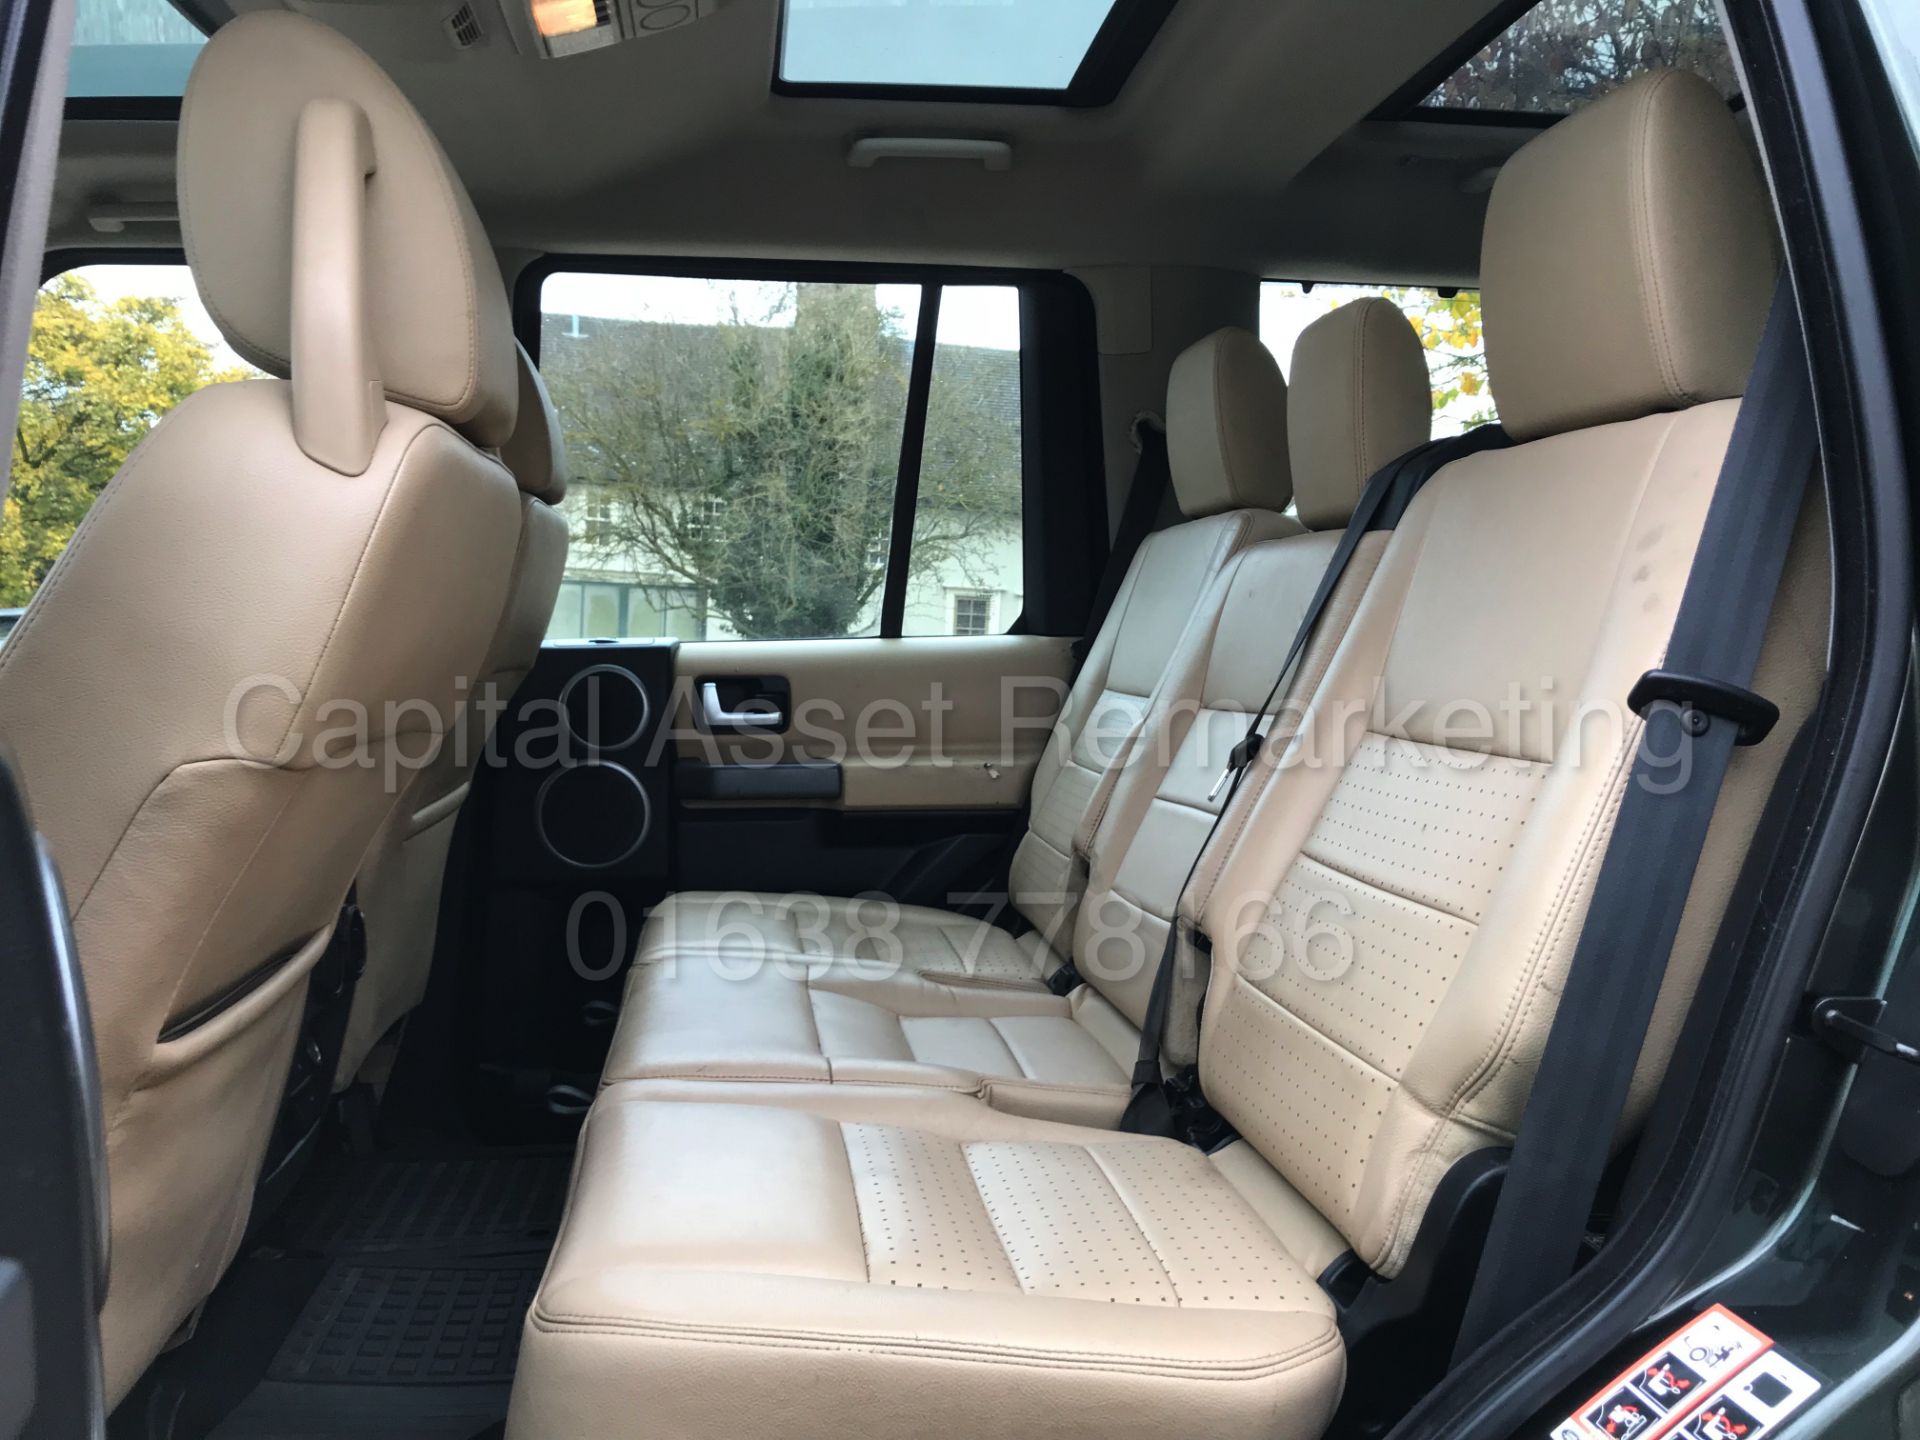 LAND ROVER DISCOVERY 3 SE (2007 MODEL) 'TDV6 - AUTO - LEATHER - SAT NAV - 7 SEATER' *MASSIVE SPEC* - Image 14 of 36